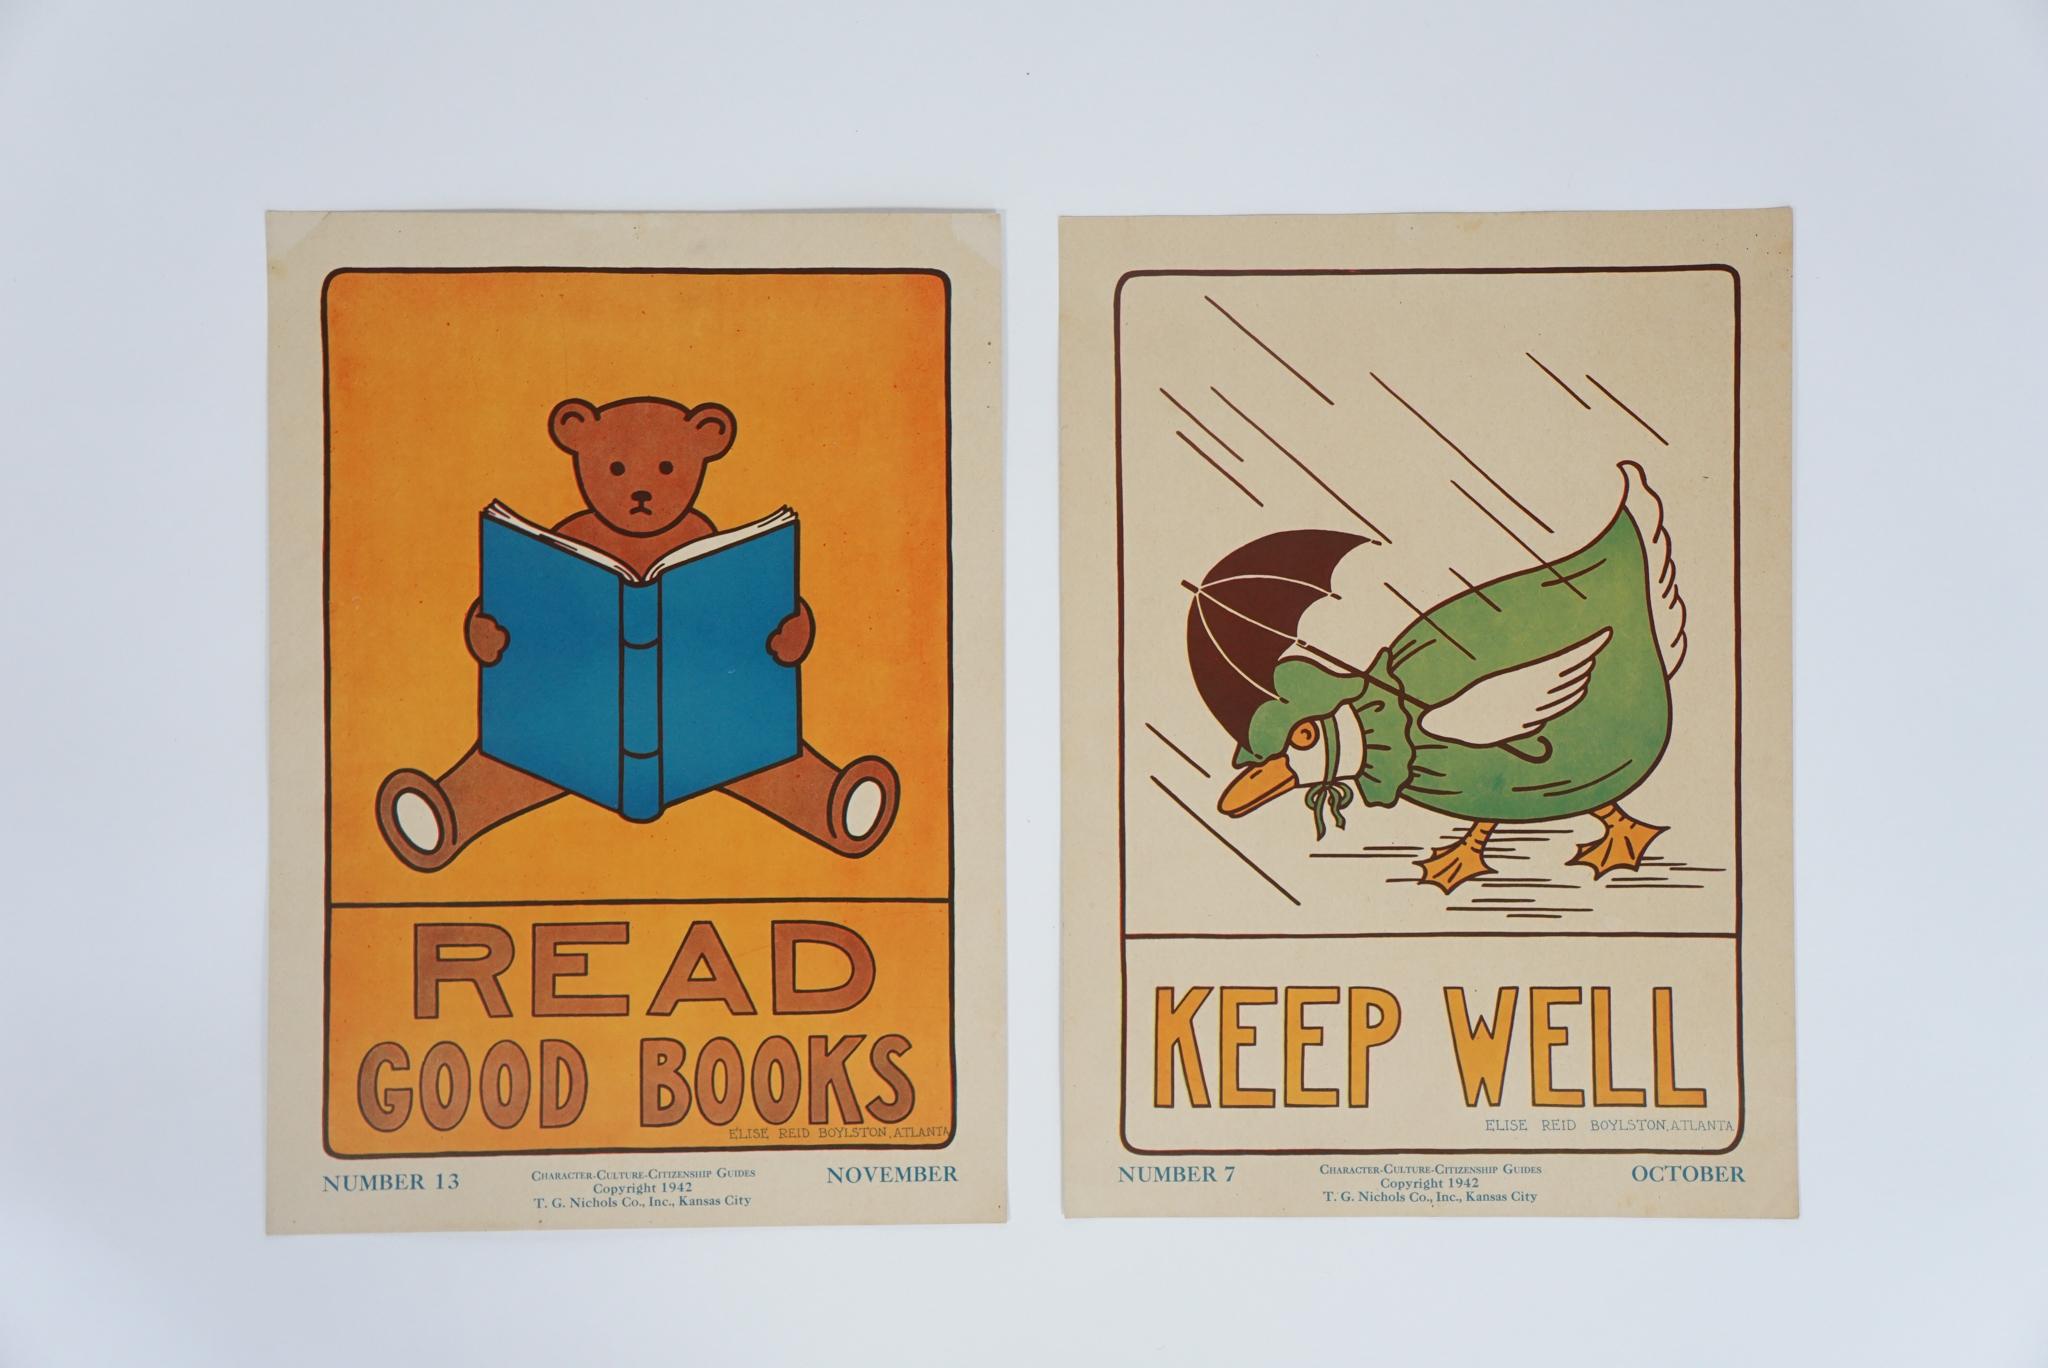 These two posters from the 1930s are just some in a Collection of 32. They were designed by Various Art Instructors in the Mid-West. ELISE REID BOYLSTON and EDITH DABNEY were just some of the Artists
Wonderful graphic and naive images created for